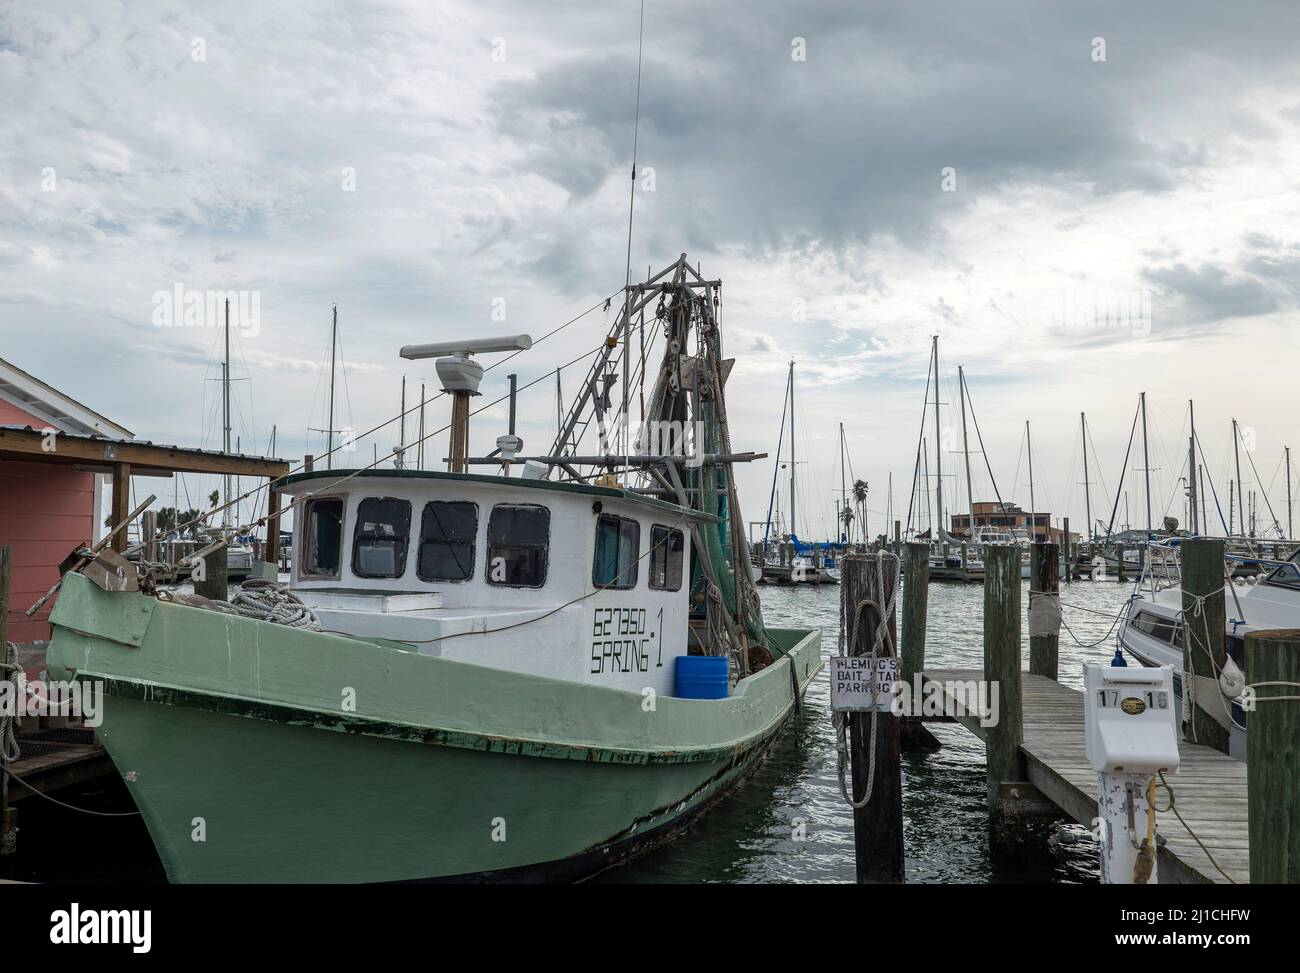 ROCKPORT, TX - 3 FEB 2020: Green and white shrimp boat tied by rope to the wooden dock in a marina. Stock Photo